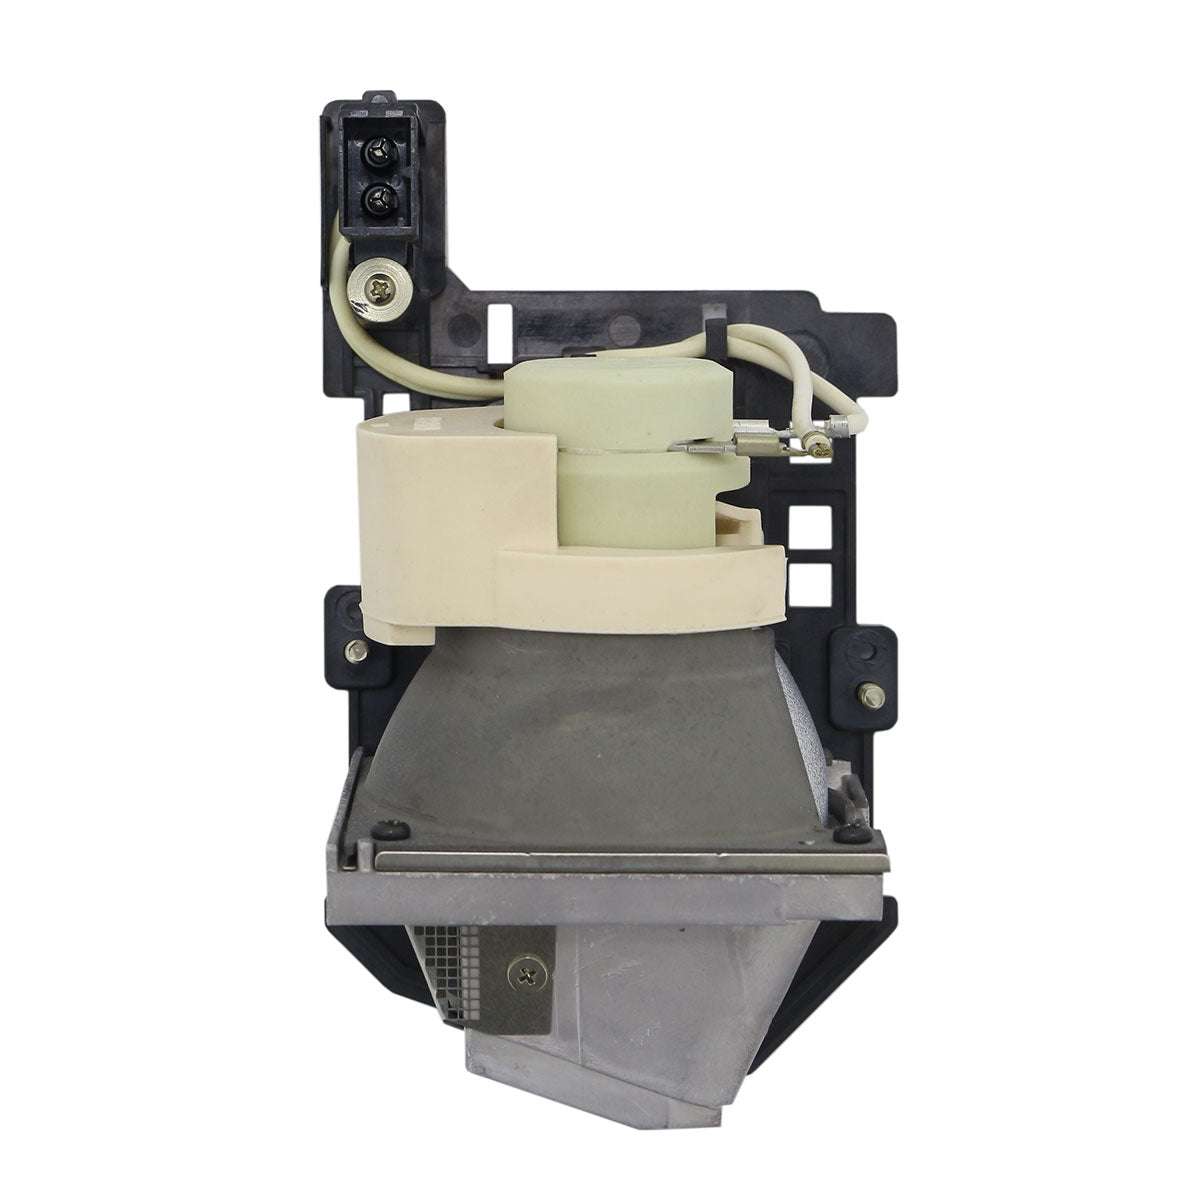 Optoma BL-FP200H Compatible Projector Lamp Module